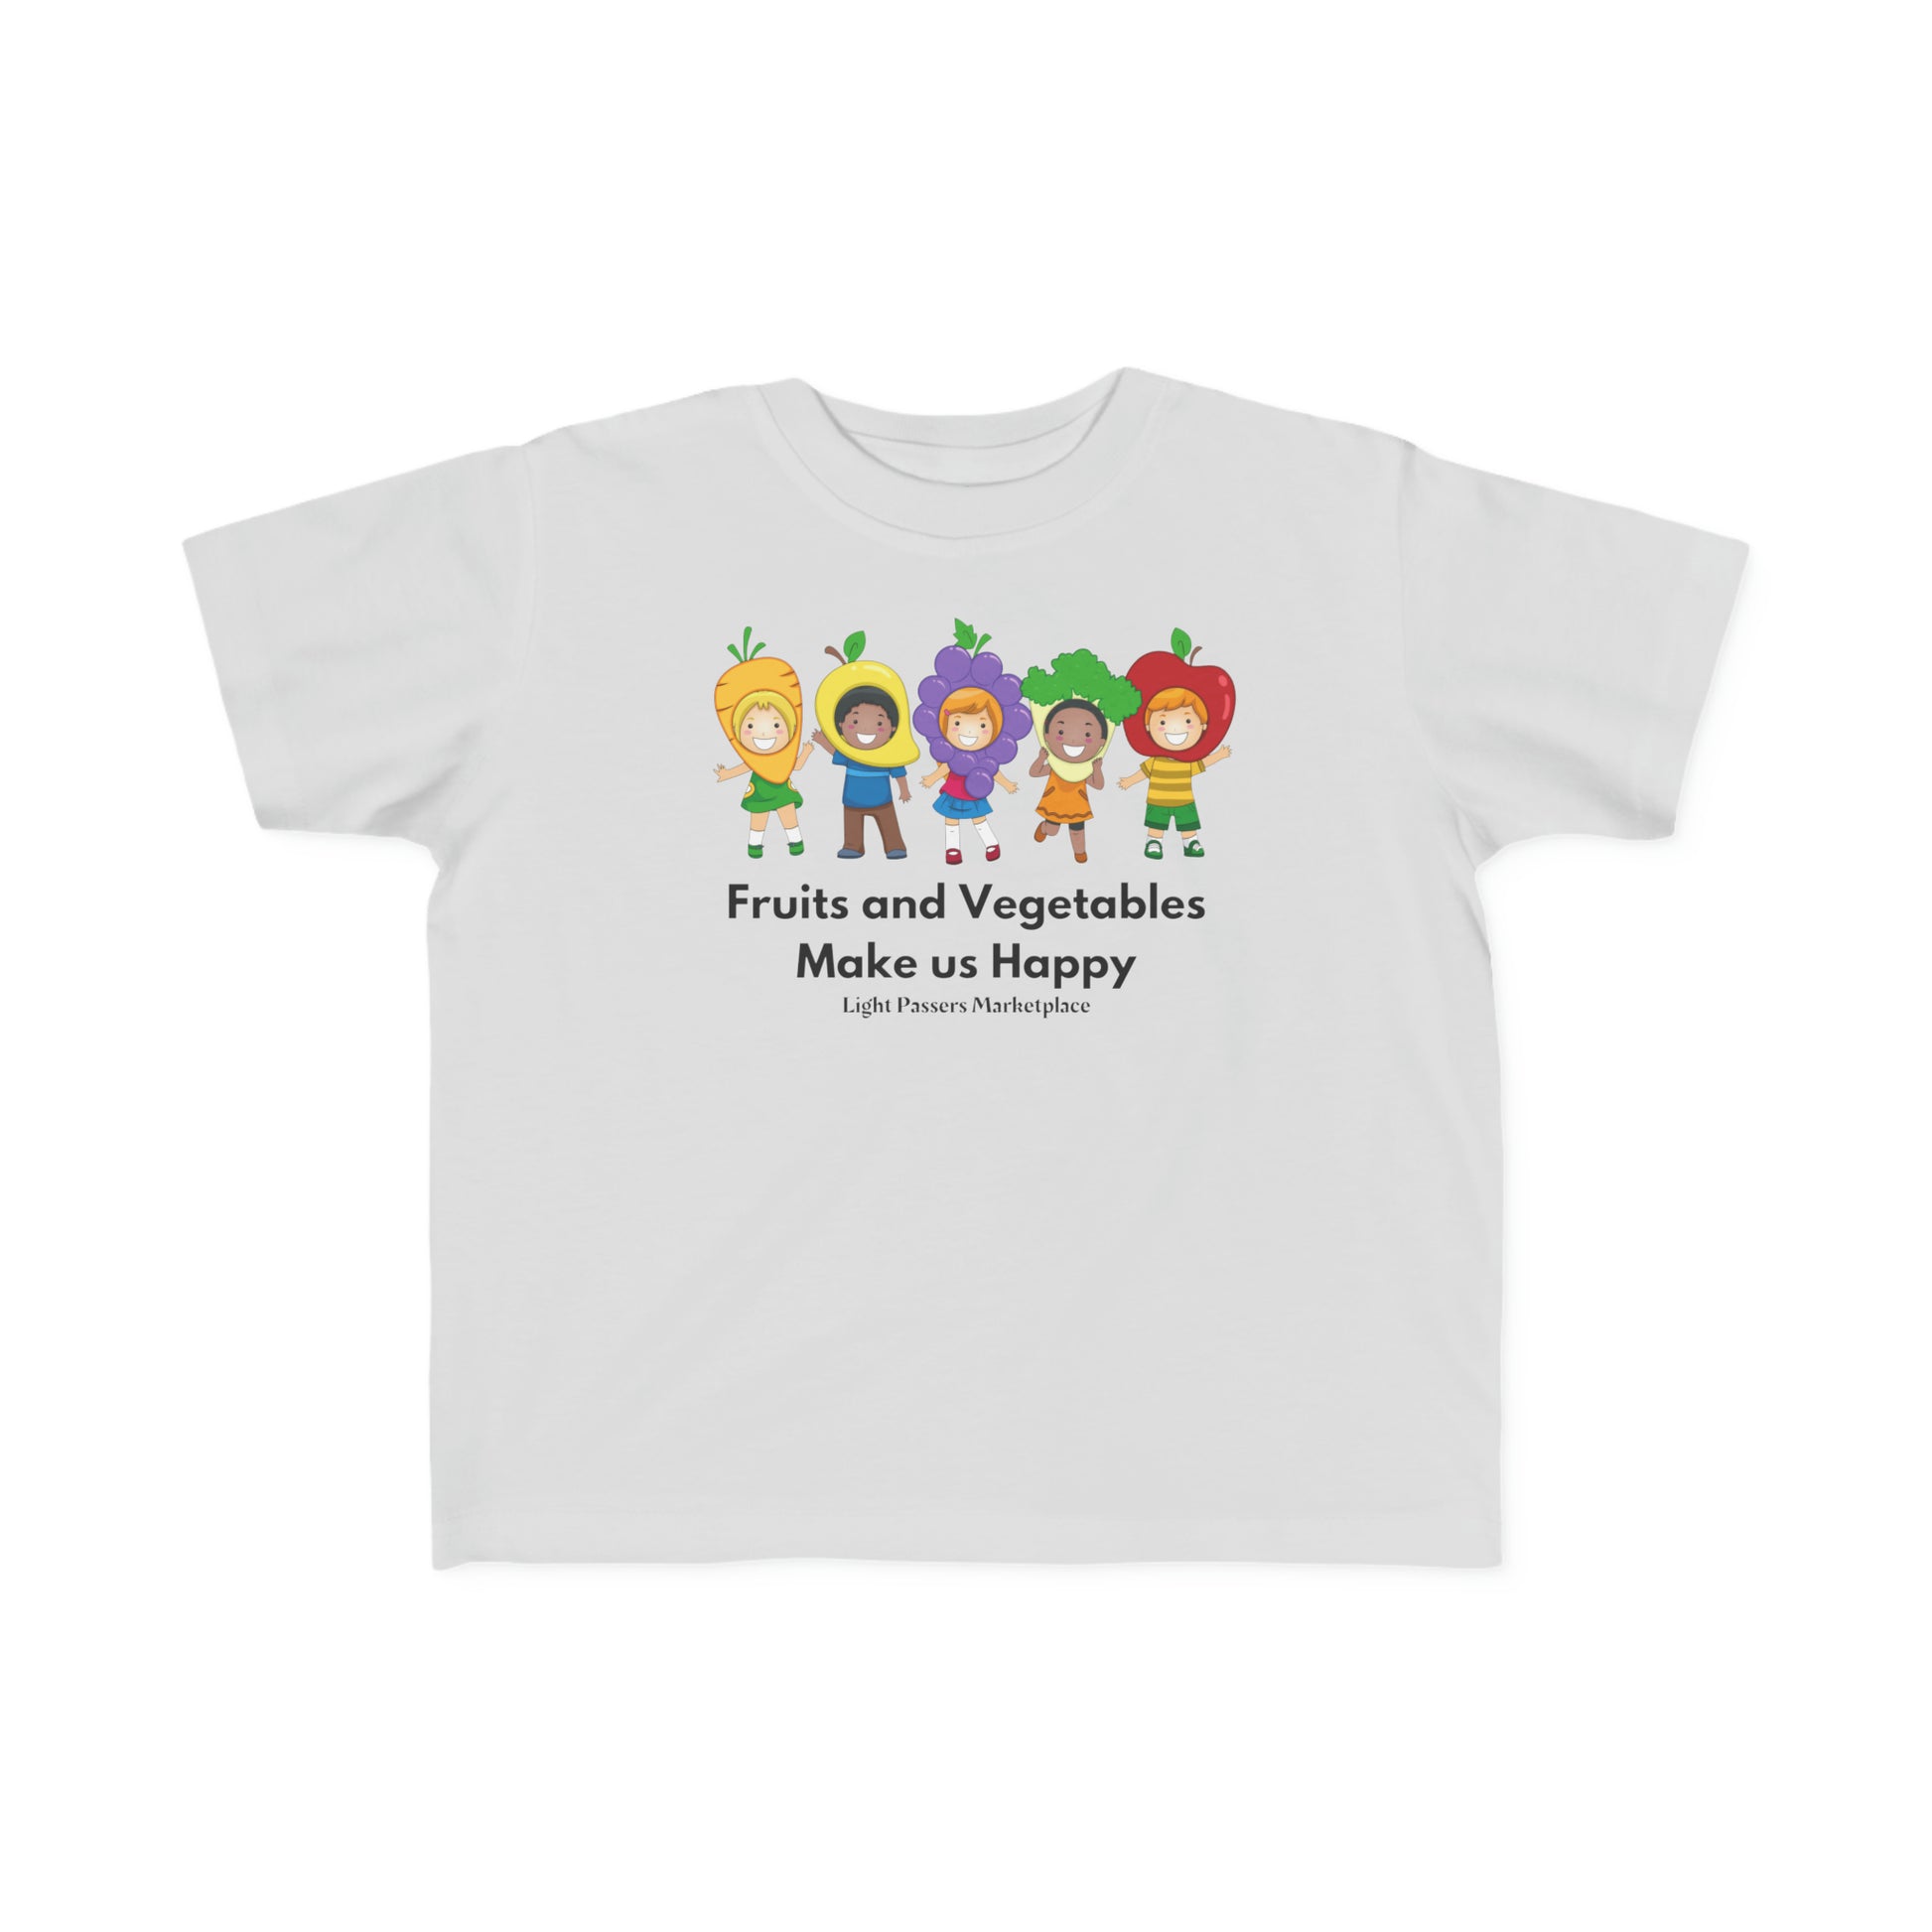 A white toddler t-shirt featuring cartoon characters inspired by fruits and vegetables, made of 100% combed, ring-spun cotton. Soft, durable, with a high-quality print. Perfect for sensitive skin and first adventures.